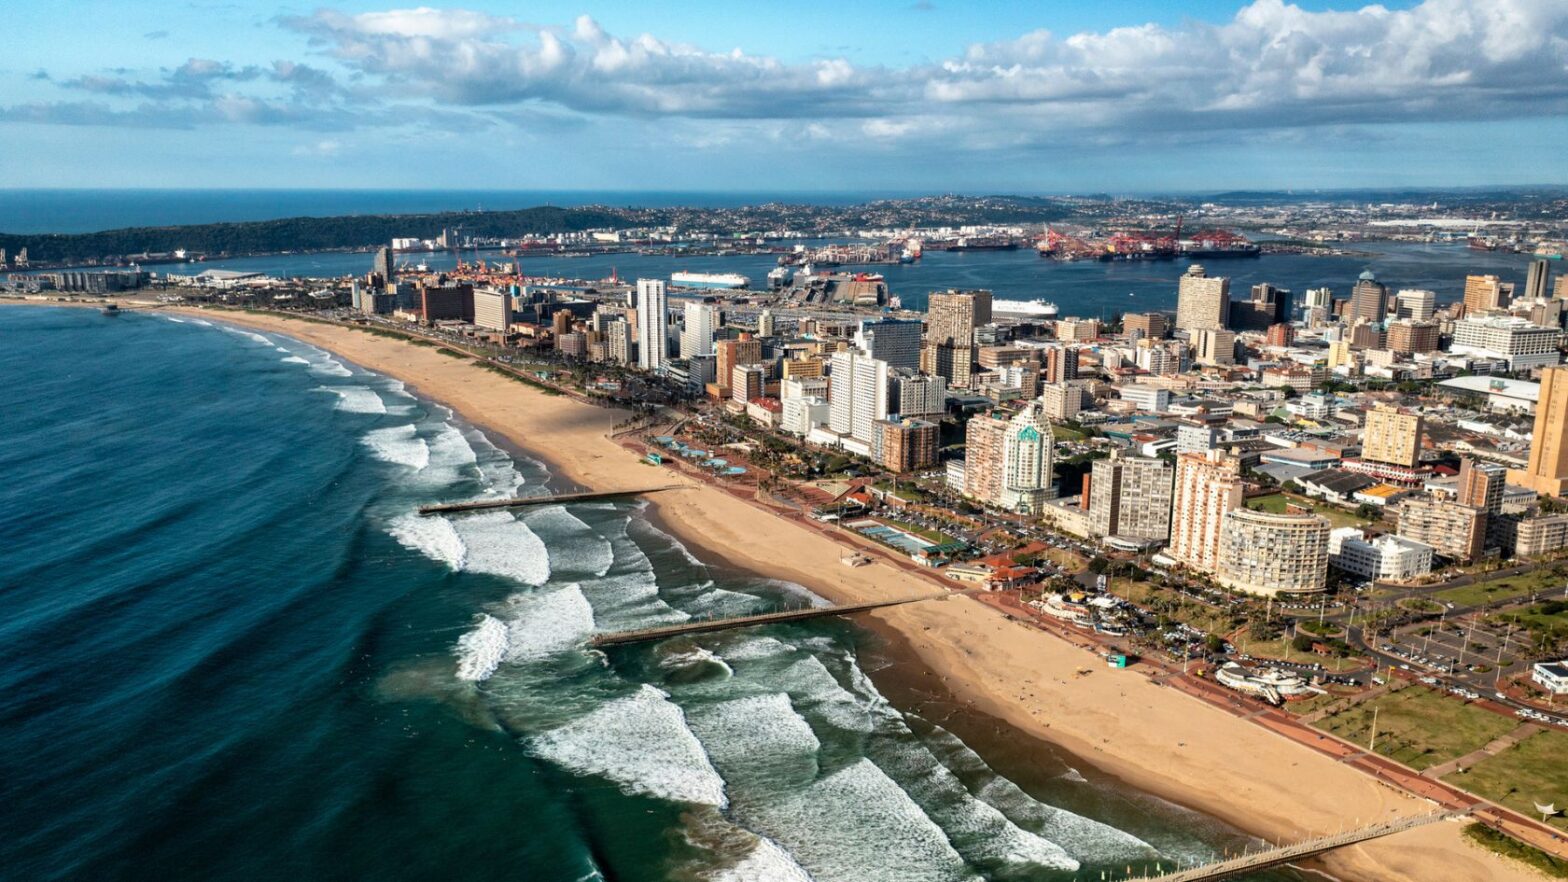 Durban skyline during the day